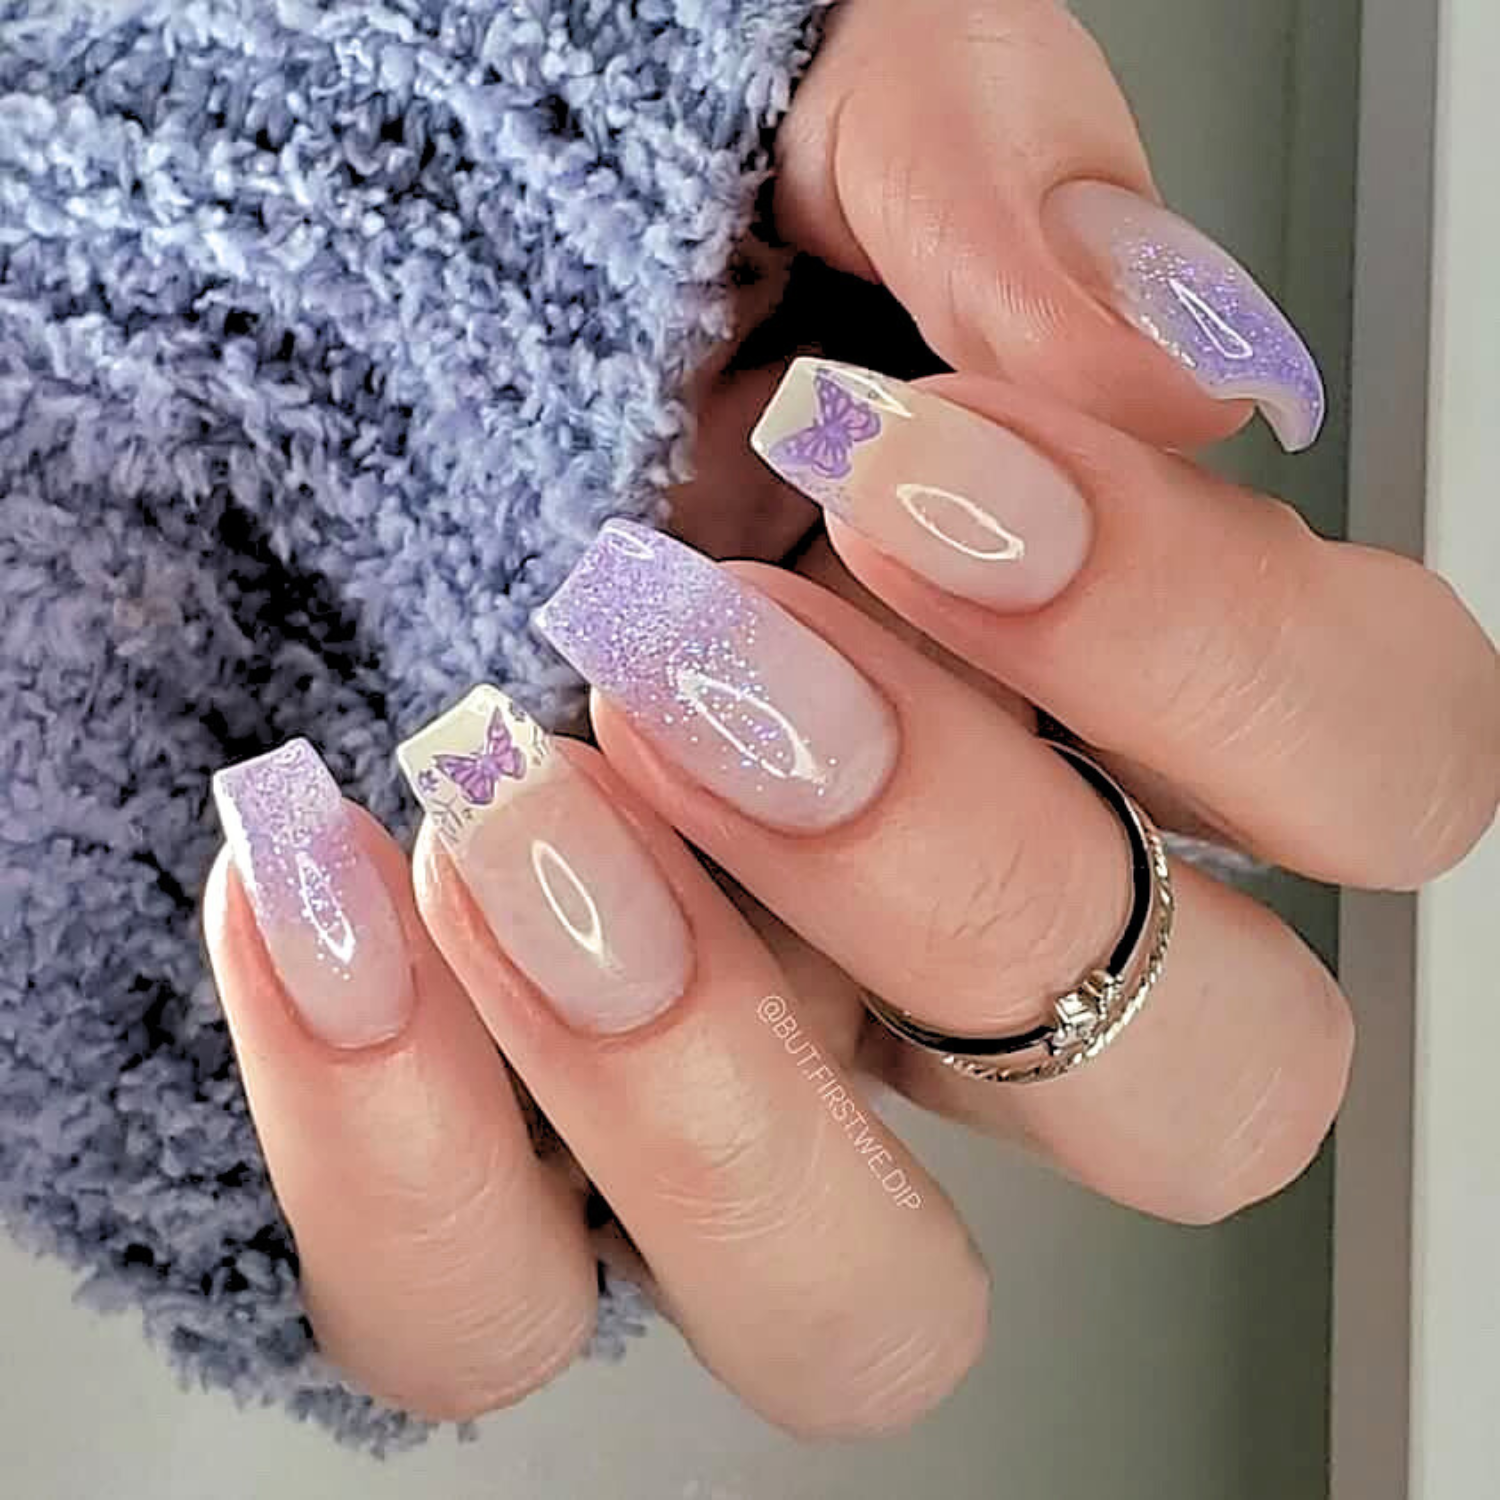 25 Neutral Nail Art Designs to Try in 2022 — Anna Elizabeth